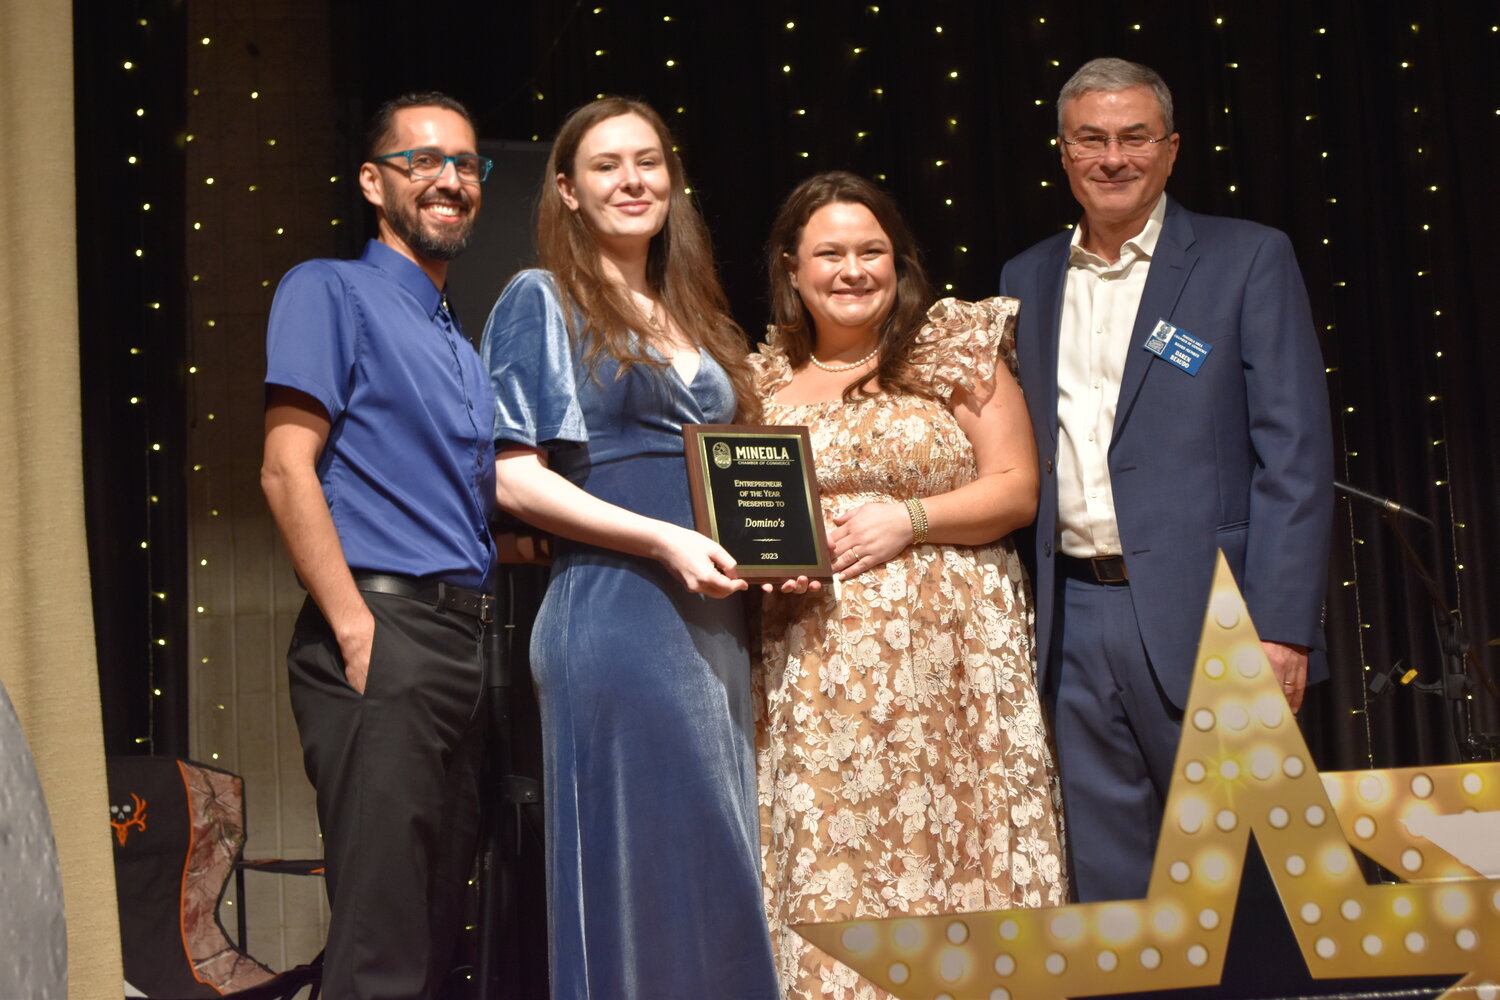 Jeramy Cruz  and Chelsey Clair with the new Dominoes Pizza franchise were awarded the Wayne Collins Entrepreneur of the Year award by the Mineola Chamber of Commerce. Presenting the award are Chamber President Kelsie McGilvray and Vice President Daren Beaudo.